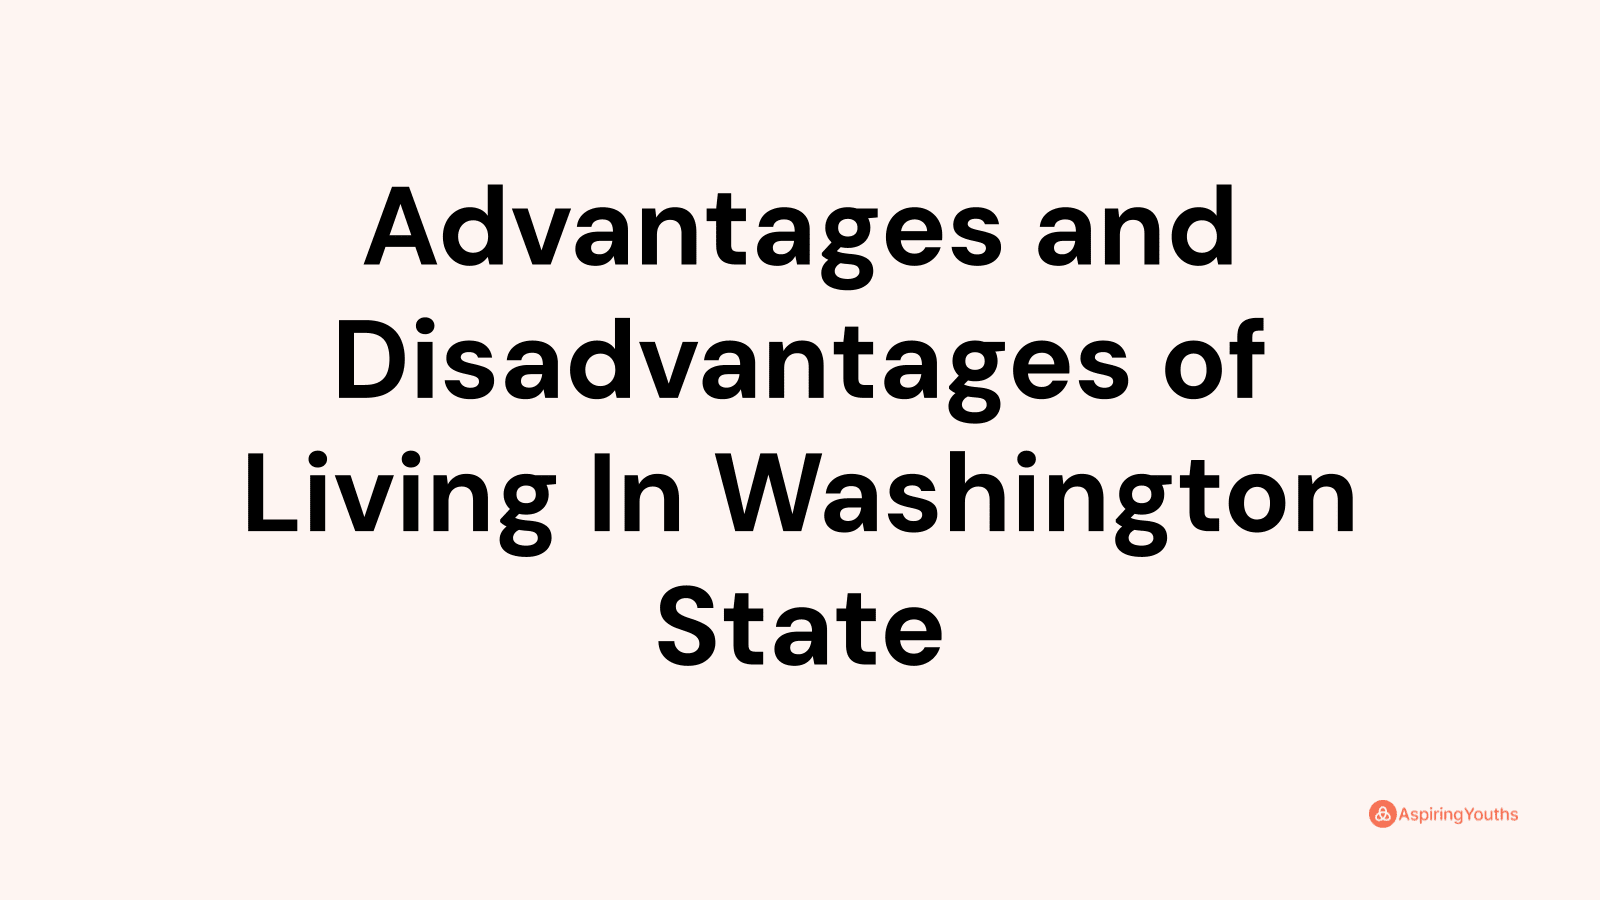 Advantages and disadvantages of Living In Washington State